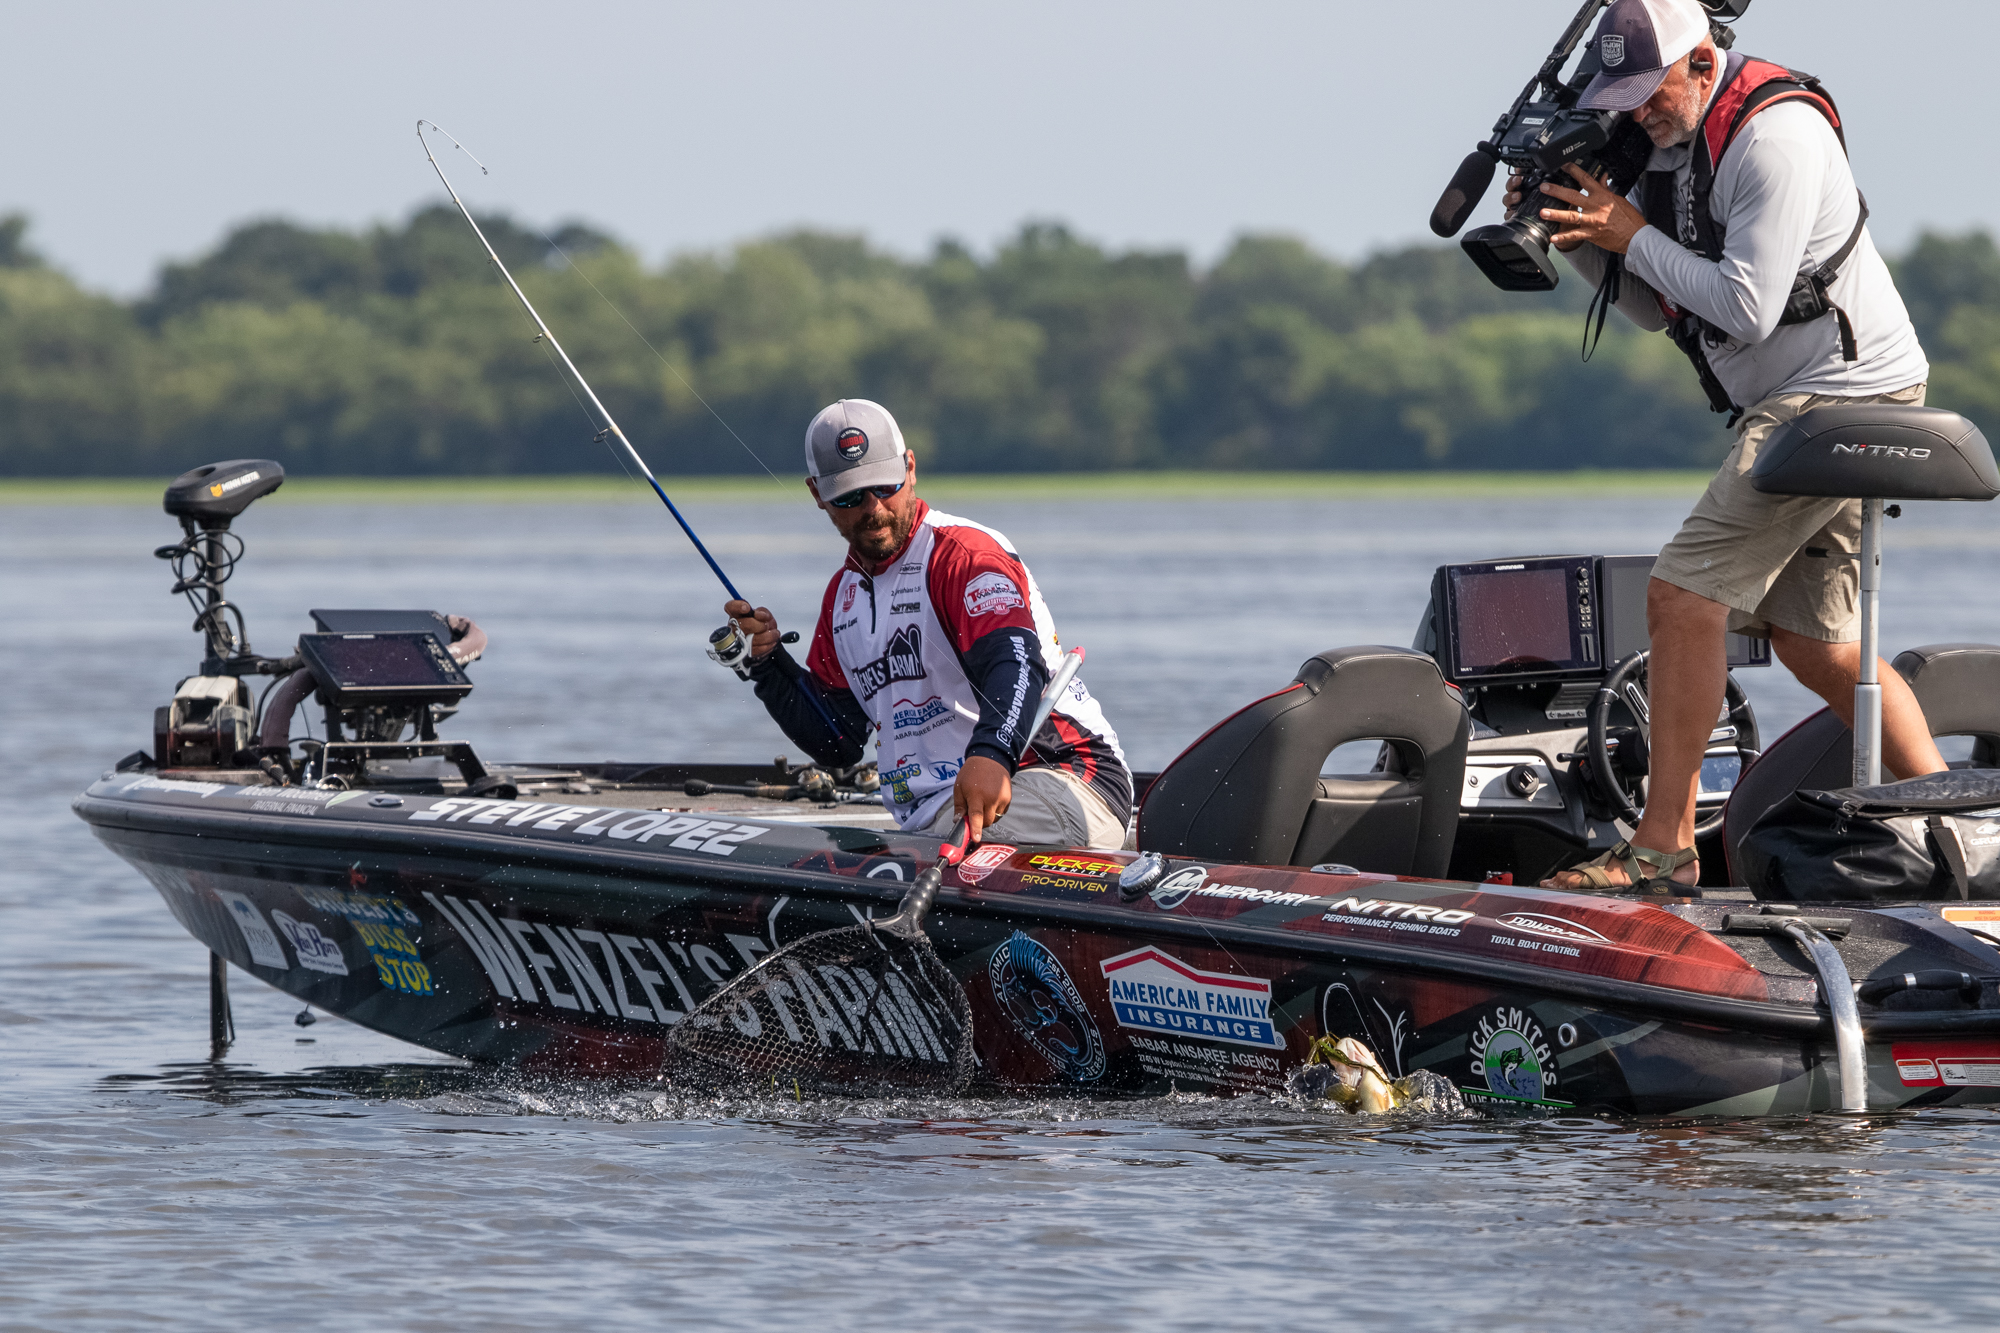 GALLERY: Top 50 tackle the Mississippi on the last day of the